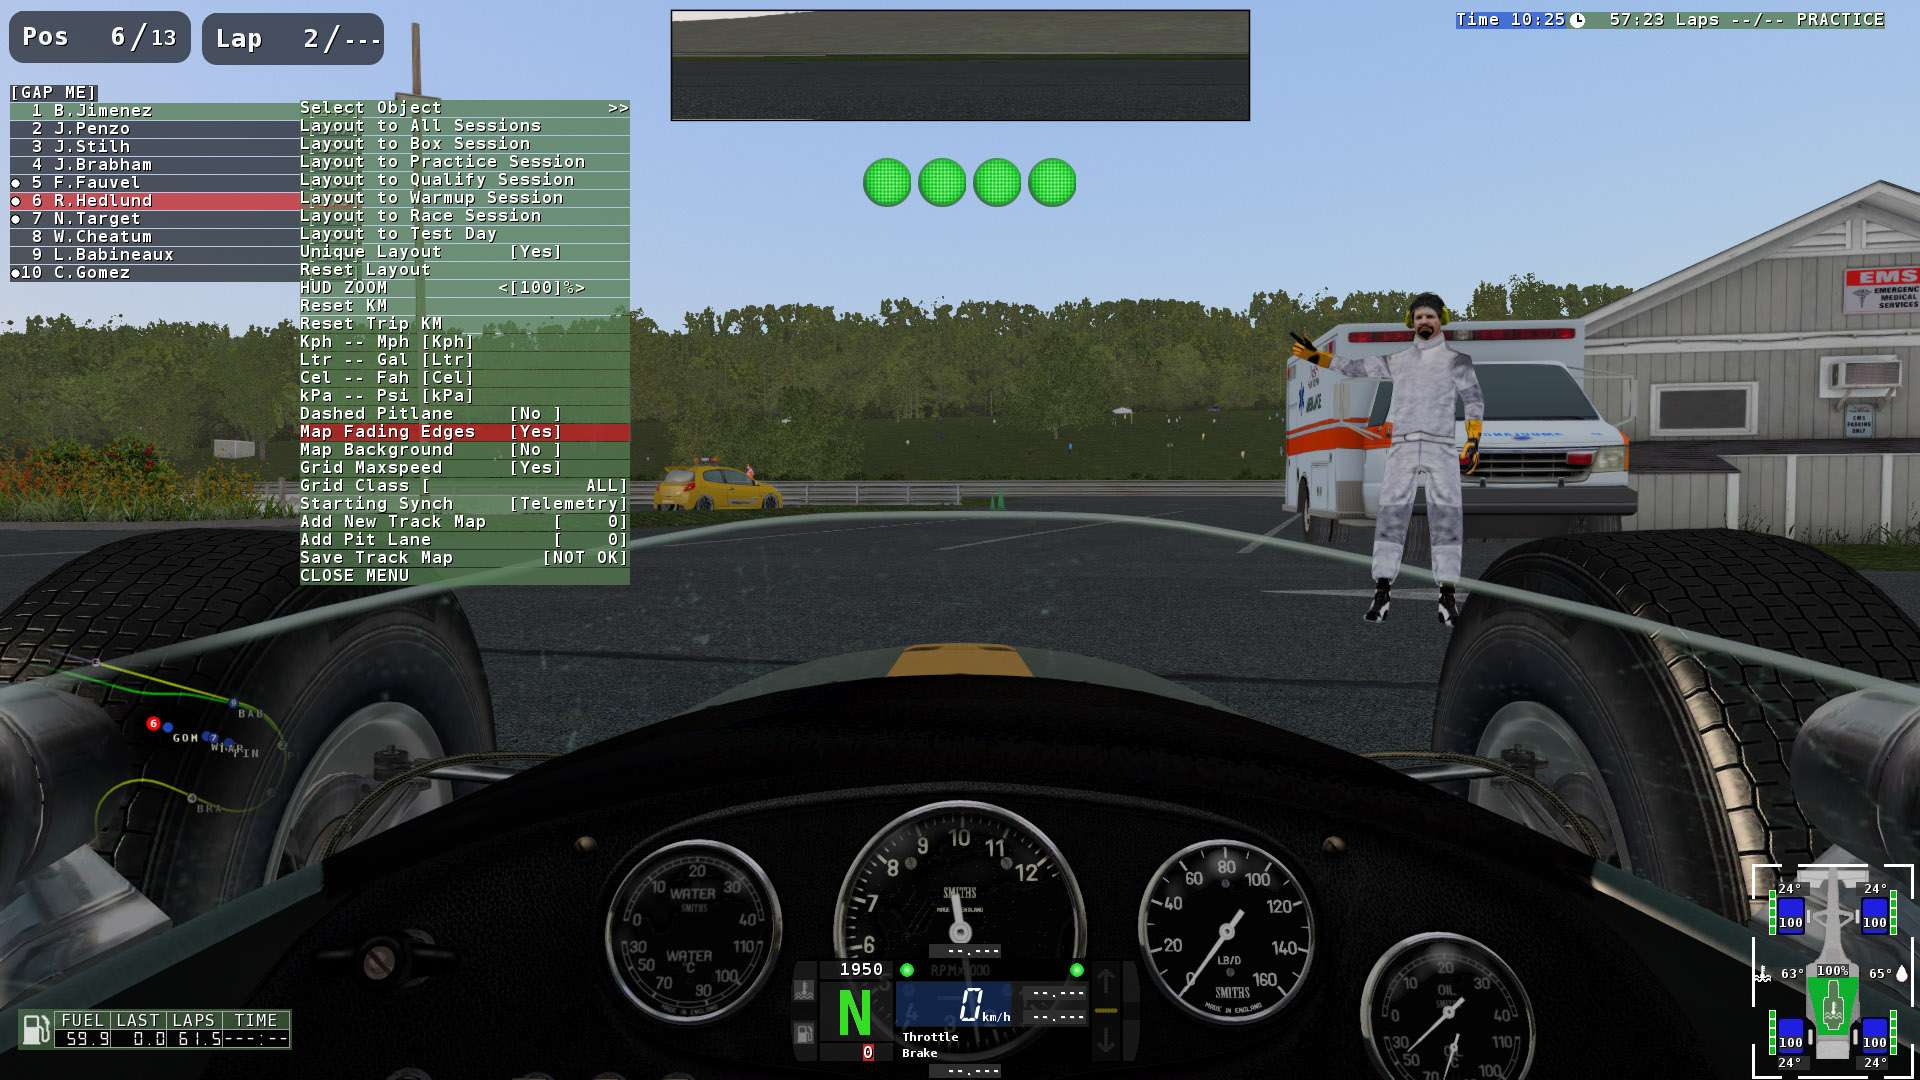 trackmap rfactor 2 keyboard commands